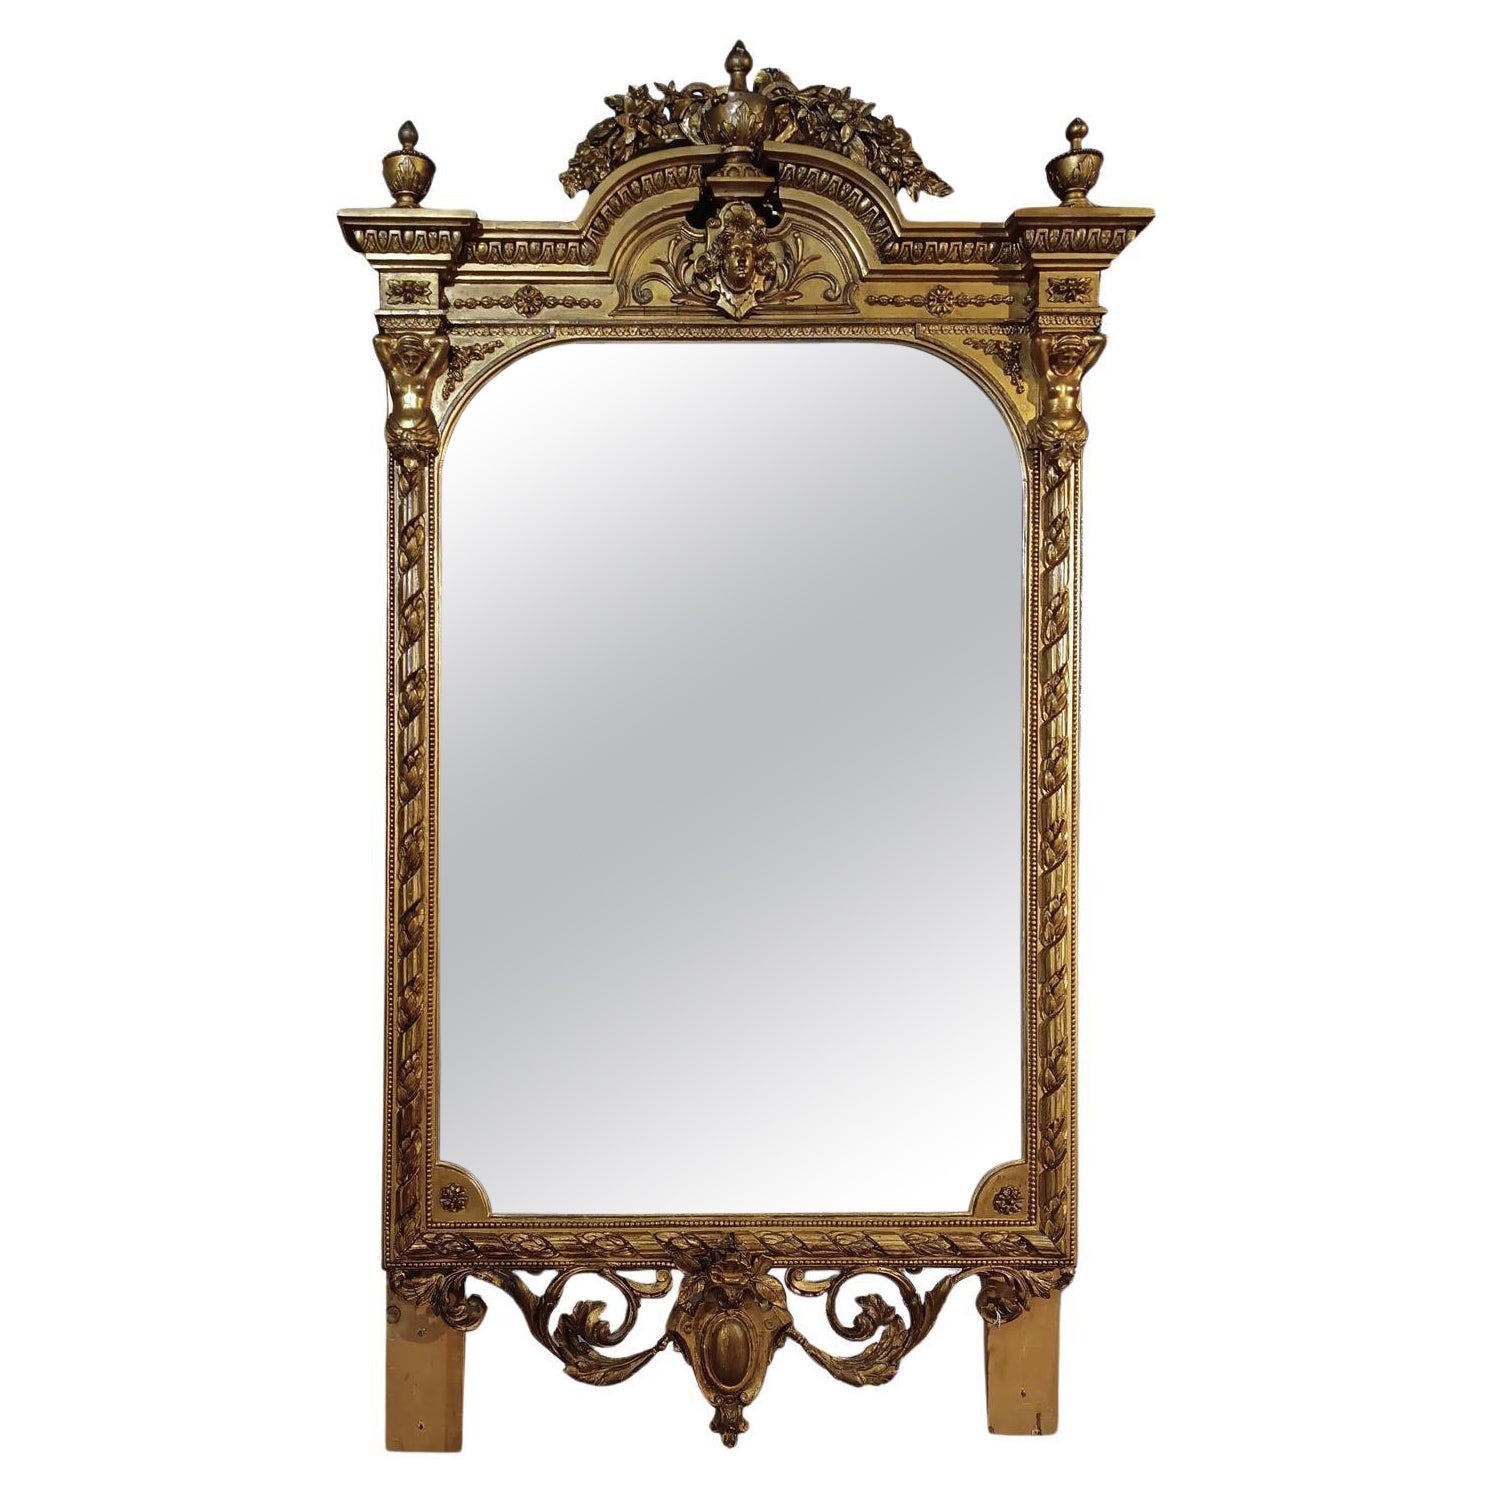 END OF THE 18th CENTURY GOLDEN MIRROR WITH CARYATIDS For Sale